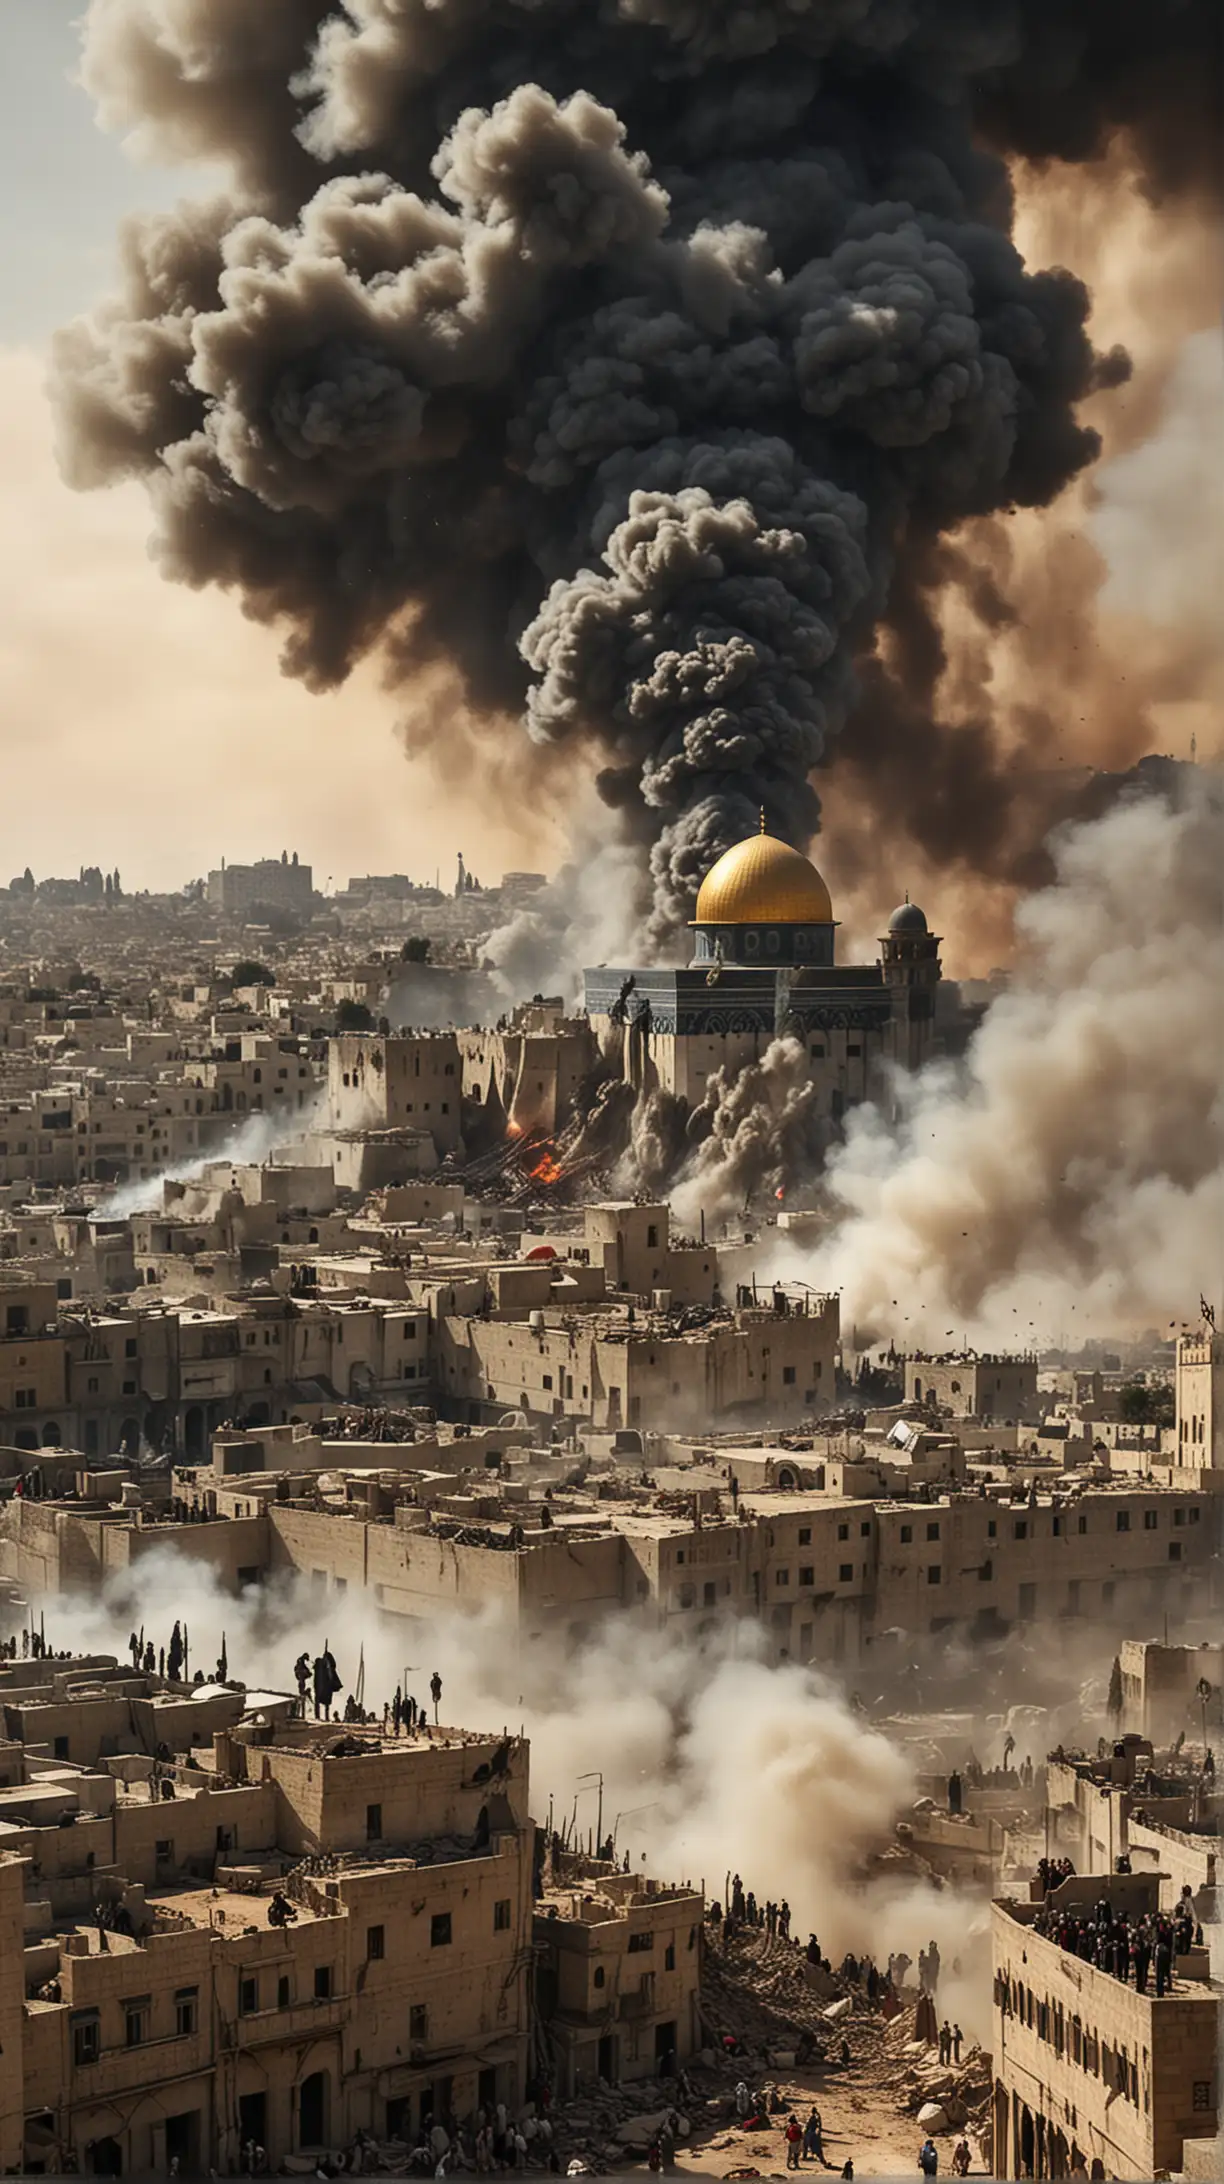 Create an image depicting the ongoing conflict between Israel and Palestine in 2024. Show a war-torn cityscape with smoke rising from buildings, highlighting the devastation in Gaza. Include Israeli military forces and Palestinian civilians caught in the crossfire. In the background, capture the tension around the sacred site of the Temple Mount/Al-Aqsa Mosque with clashes between protesters and security forces. The image should evoke the deep historical roots, humanitarian crisis, and the struggle for peace in this conflict.